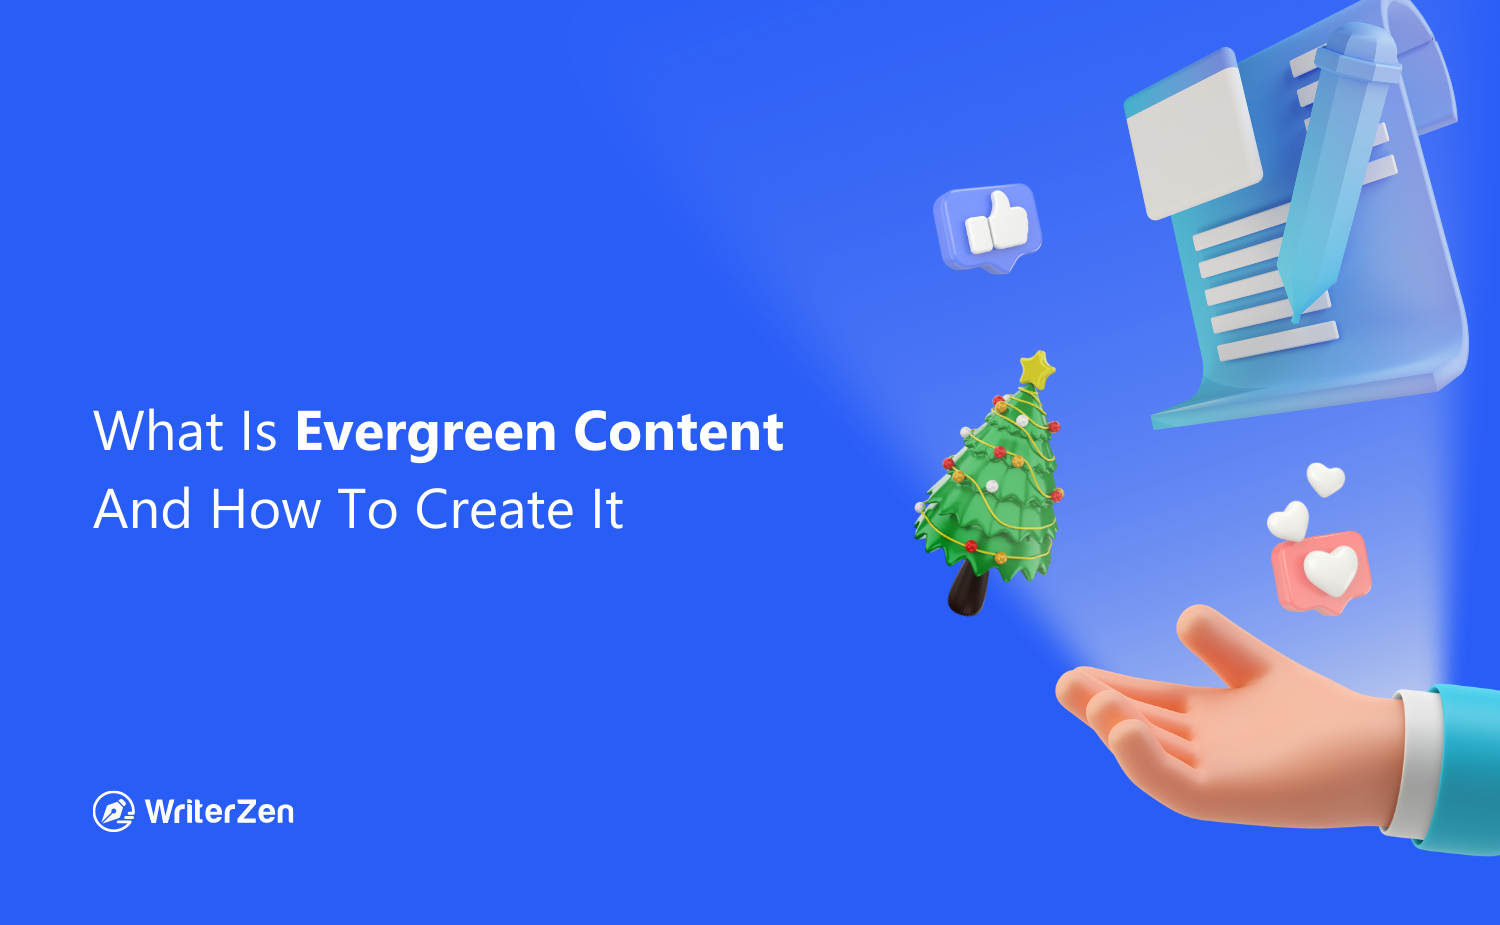 What Is Evergreen Content and How to Create It